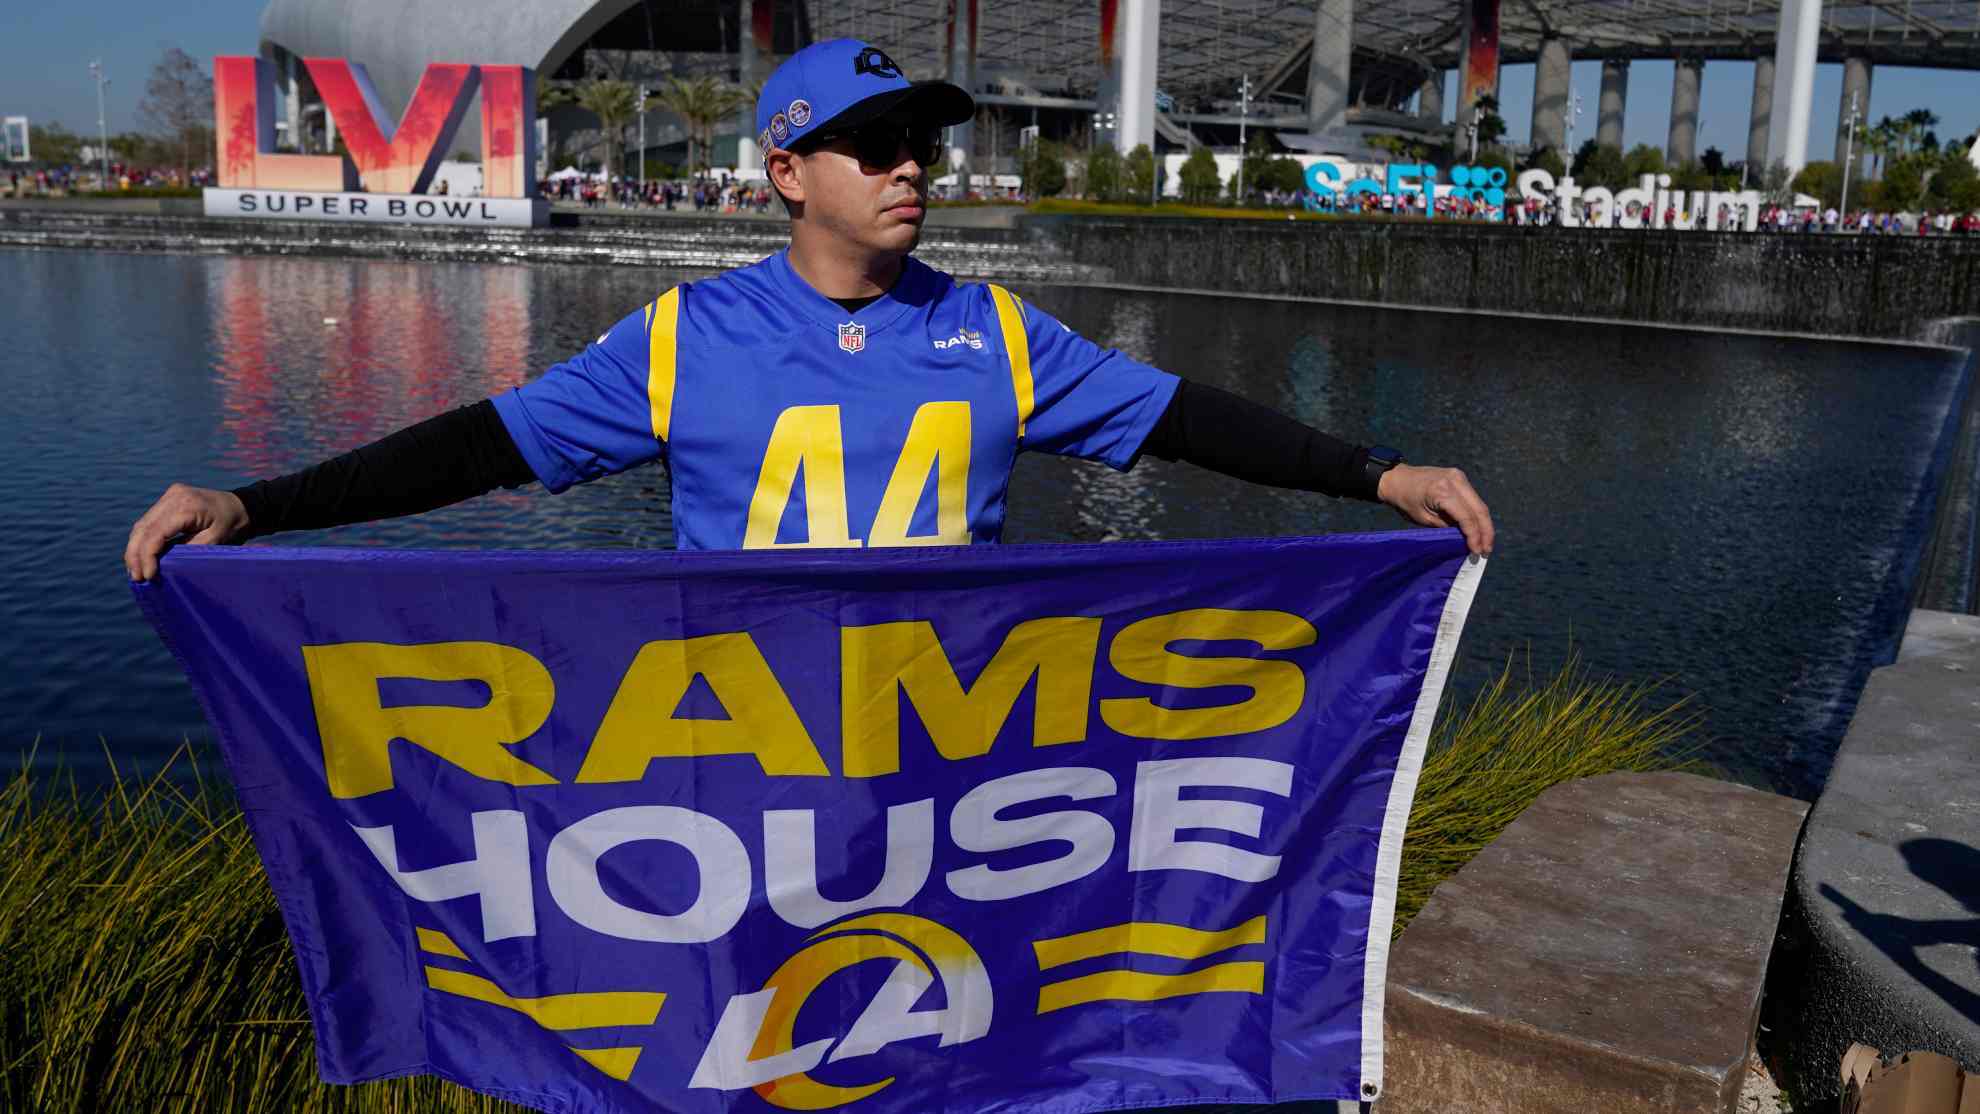 Super Bowl LVI: Los Angeles Rams, second team to play at home in